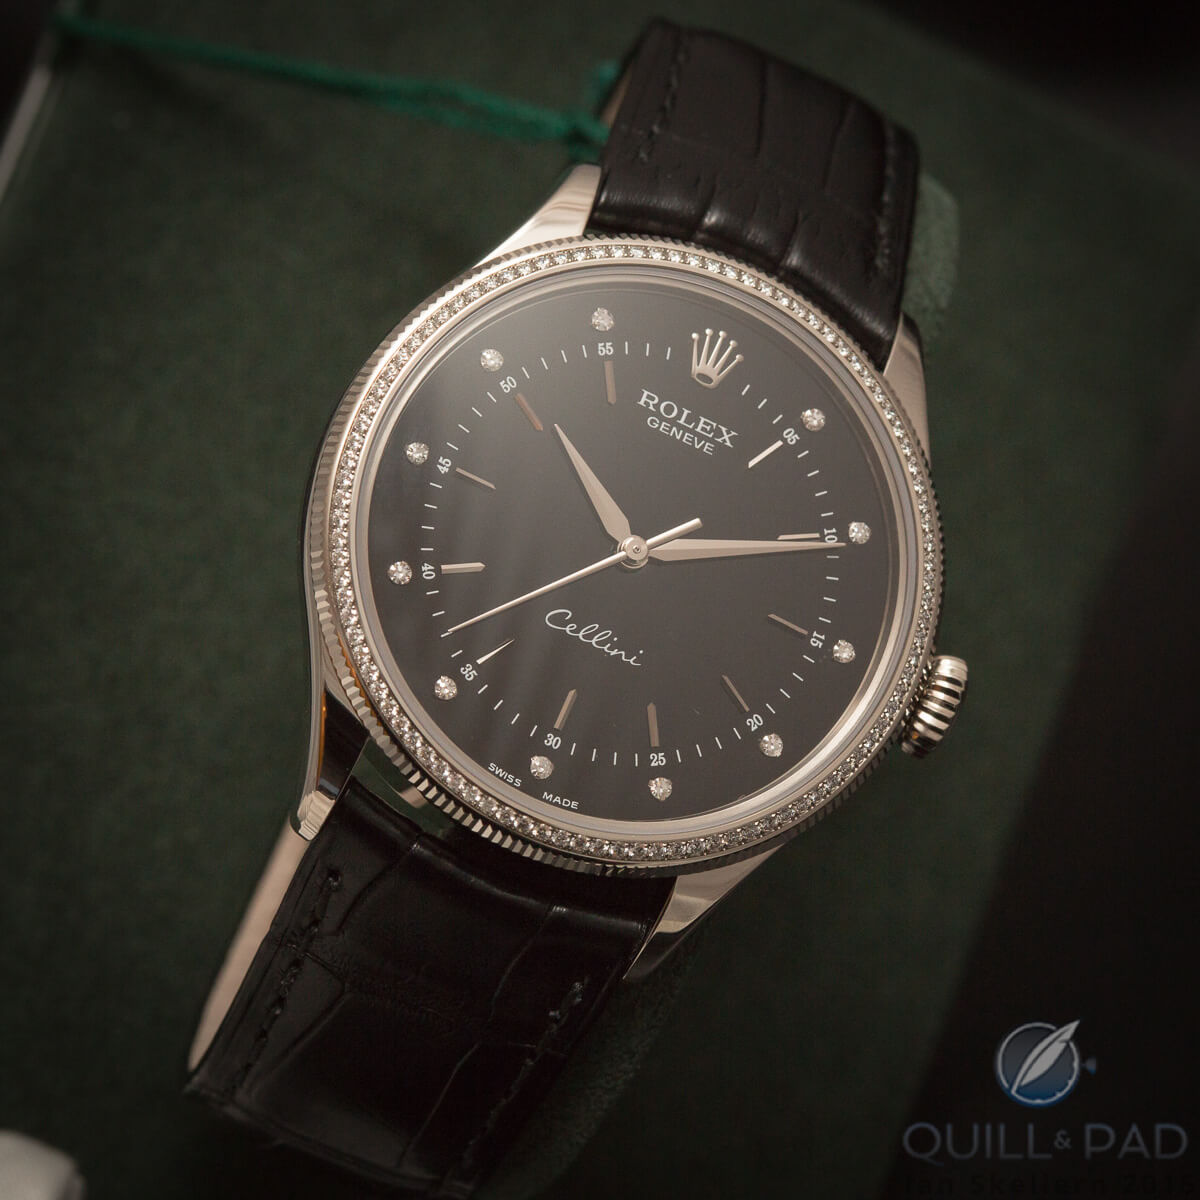 Rolex Cellini time-only with dark dial and diamond-set bezel